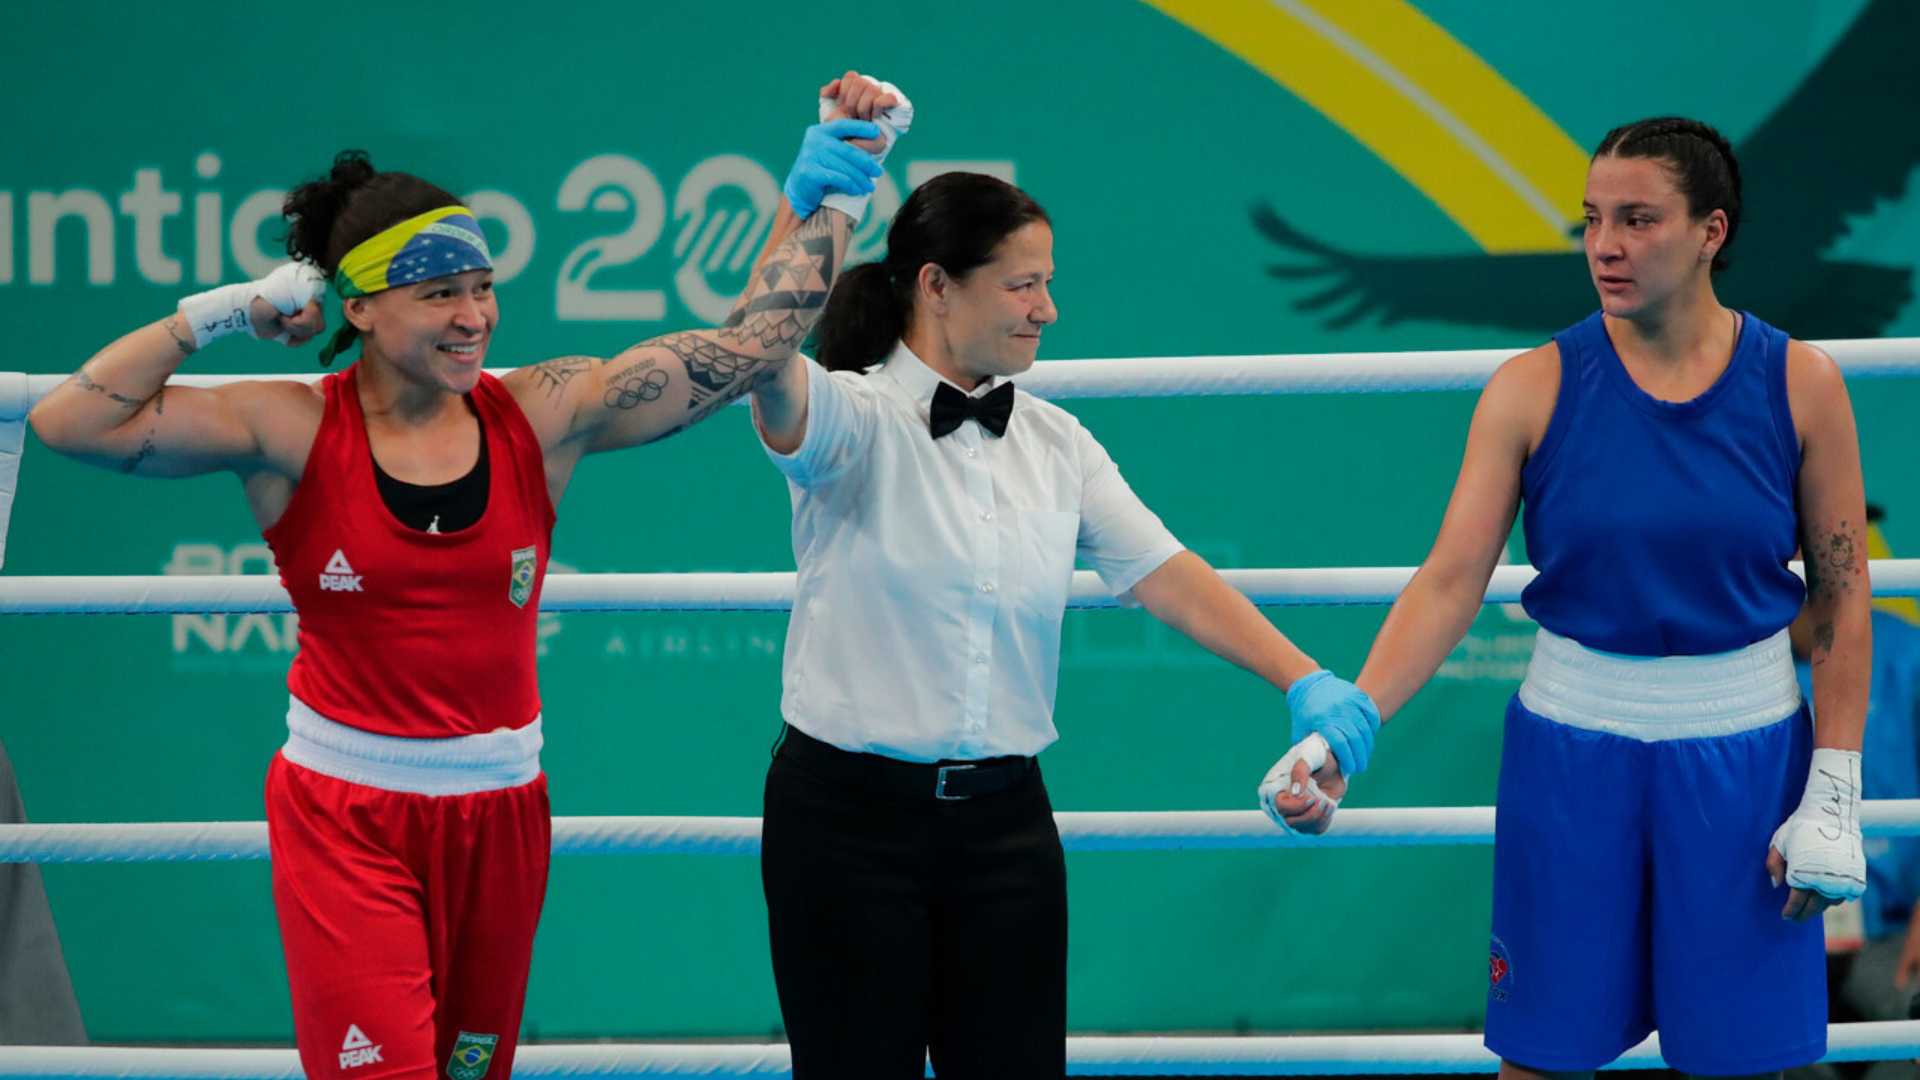 Brazilian Beatriz Soares qualifies for Olympic boxing quickly